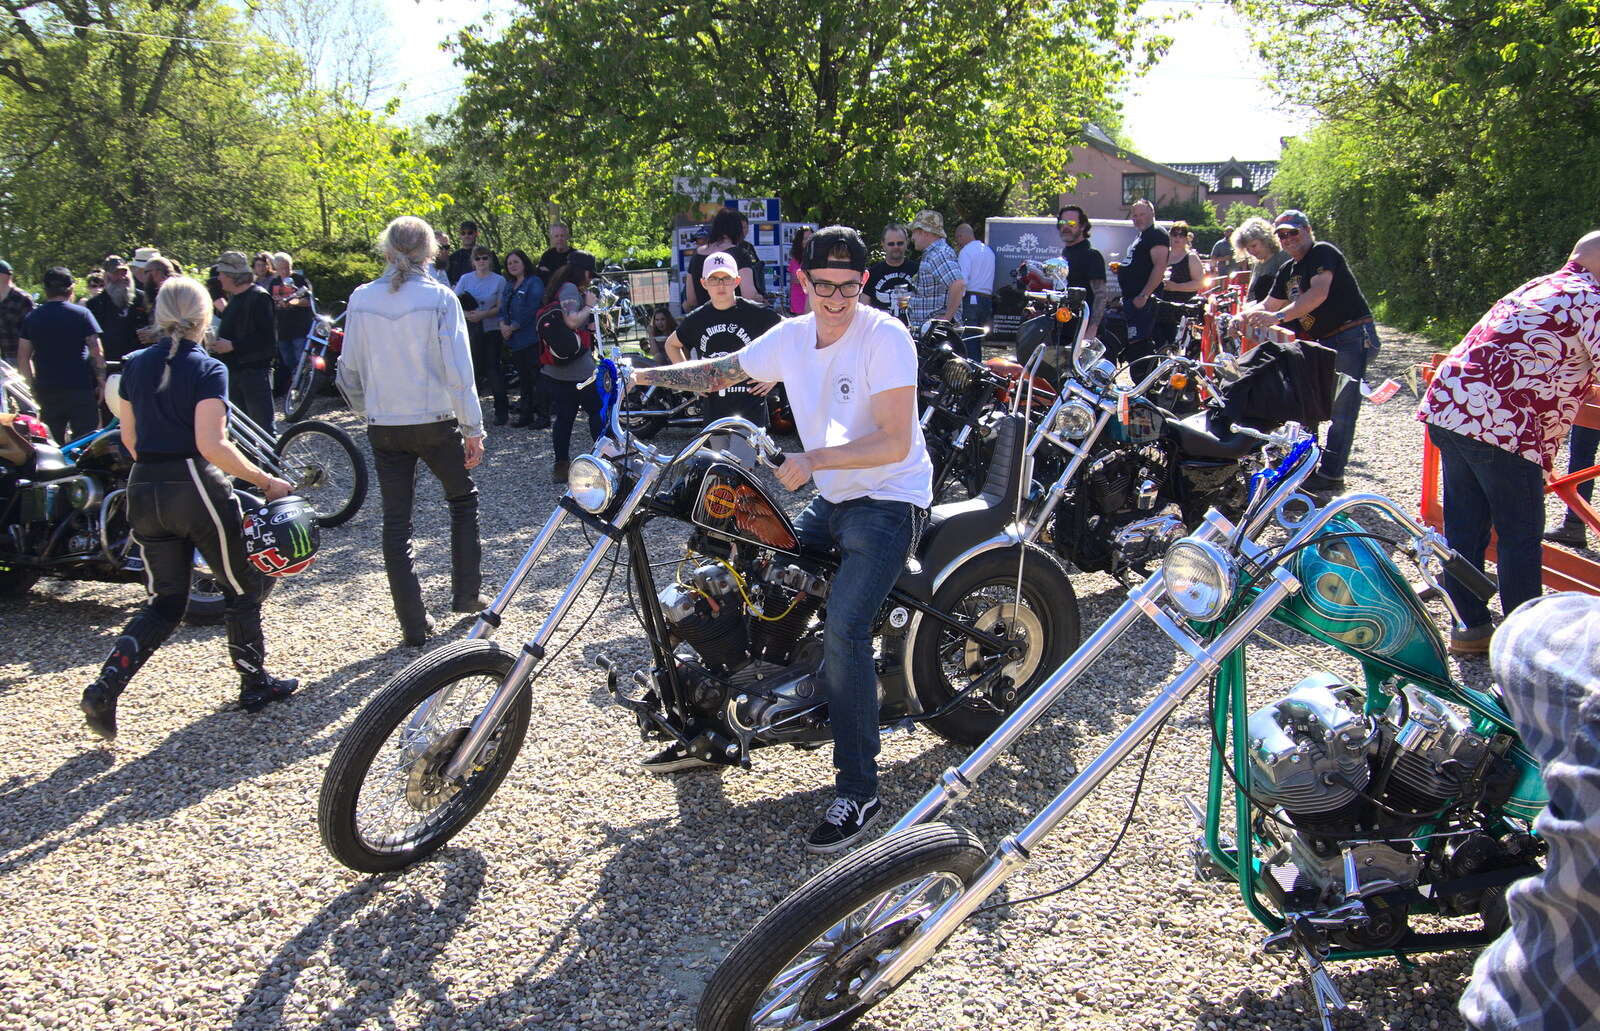 Another chopper parks up from Beer, Bikes and Bands, Burston Crown, Burston, Norfolk - 6th May 2018